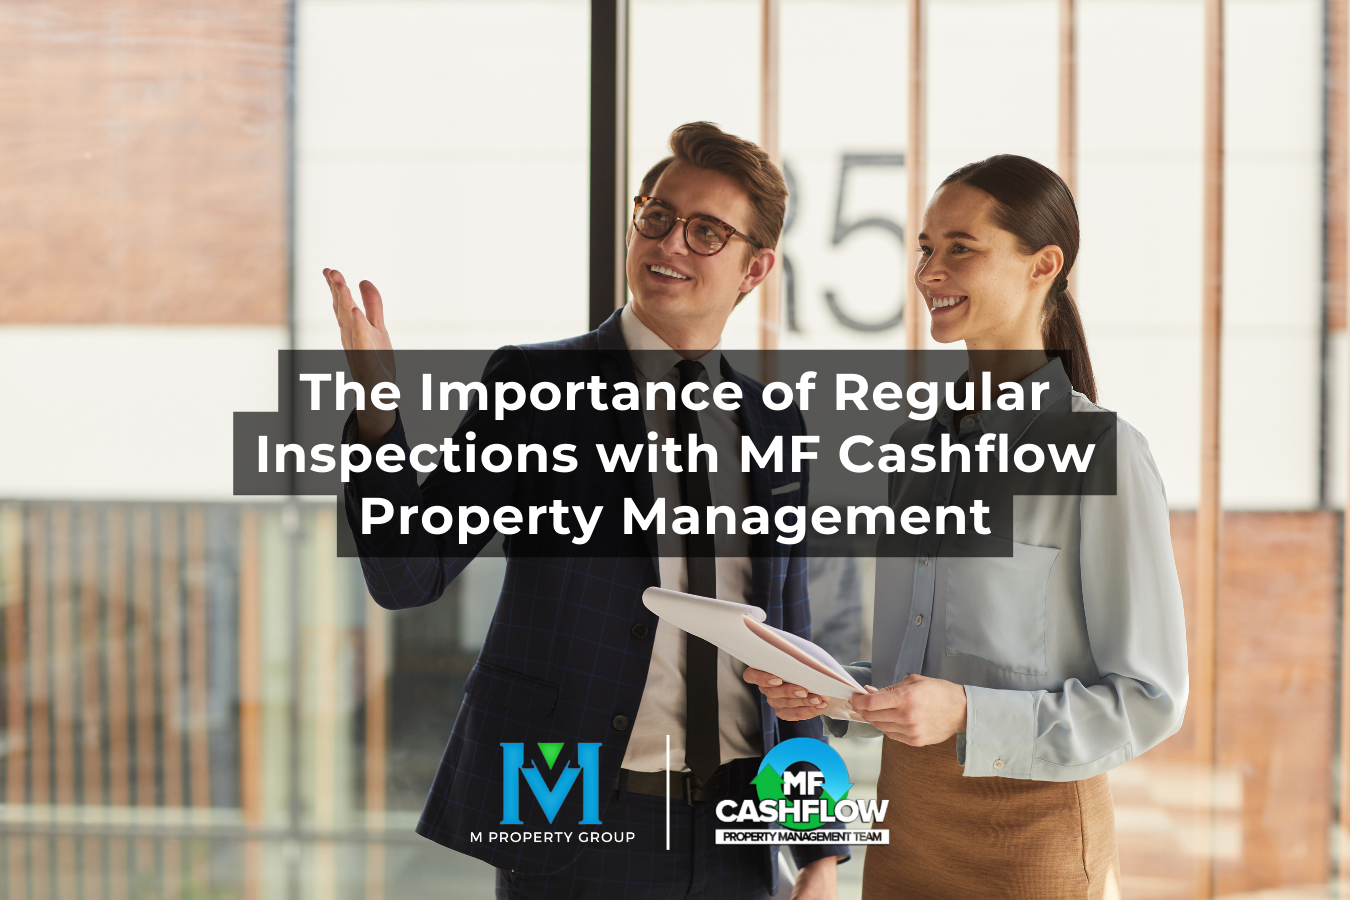 The Importance of Regular Inspections with MF Cashflow Property Management